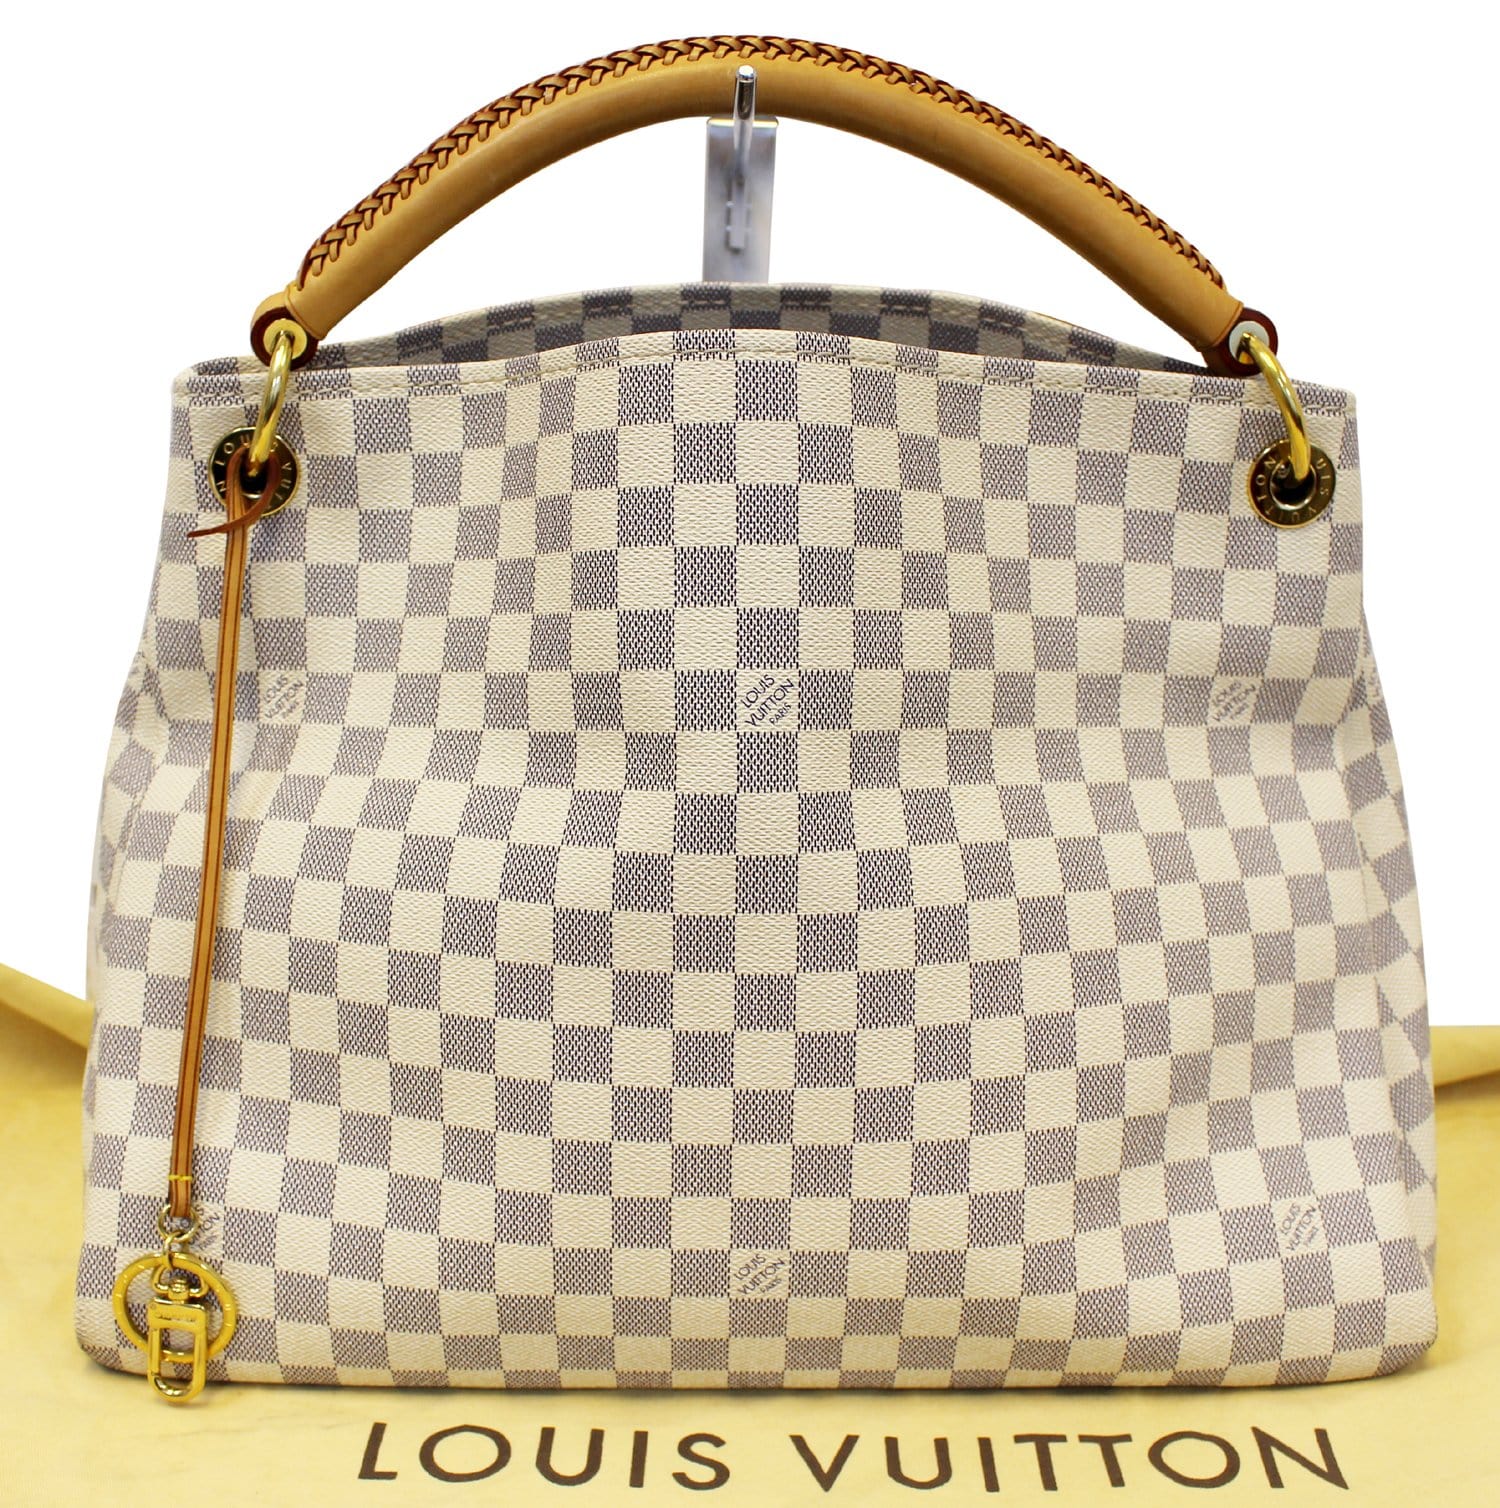 This LV Damier Briefcase is in great condition and is large enough